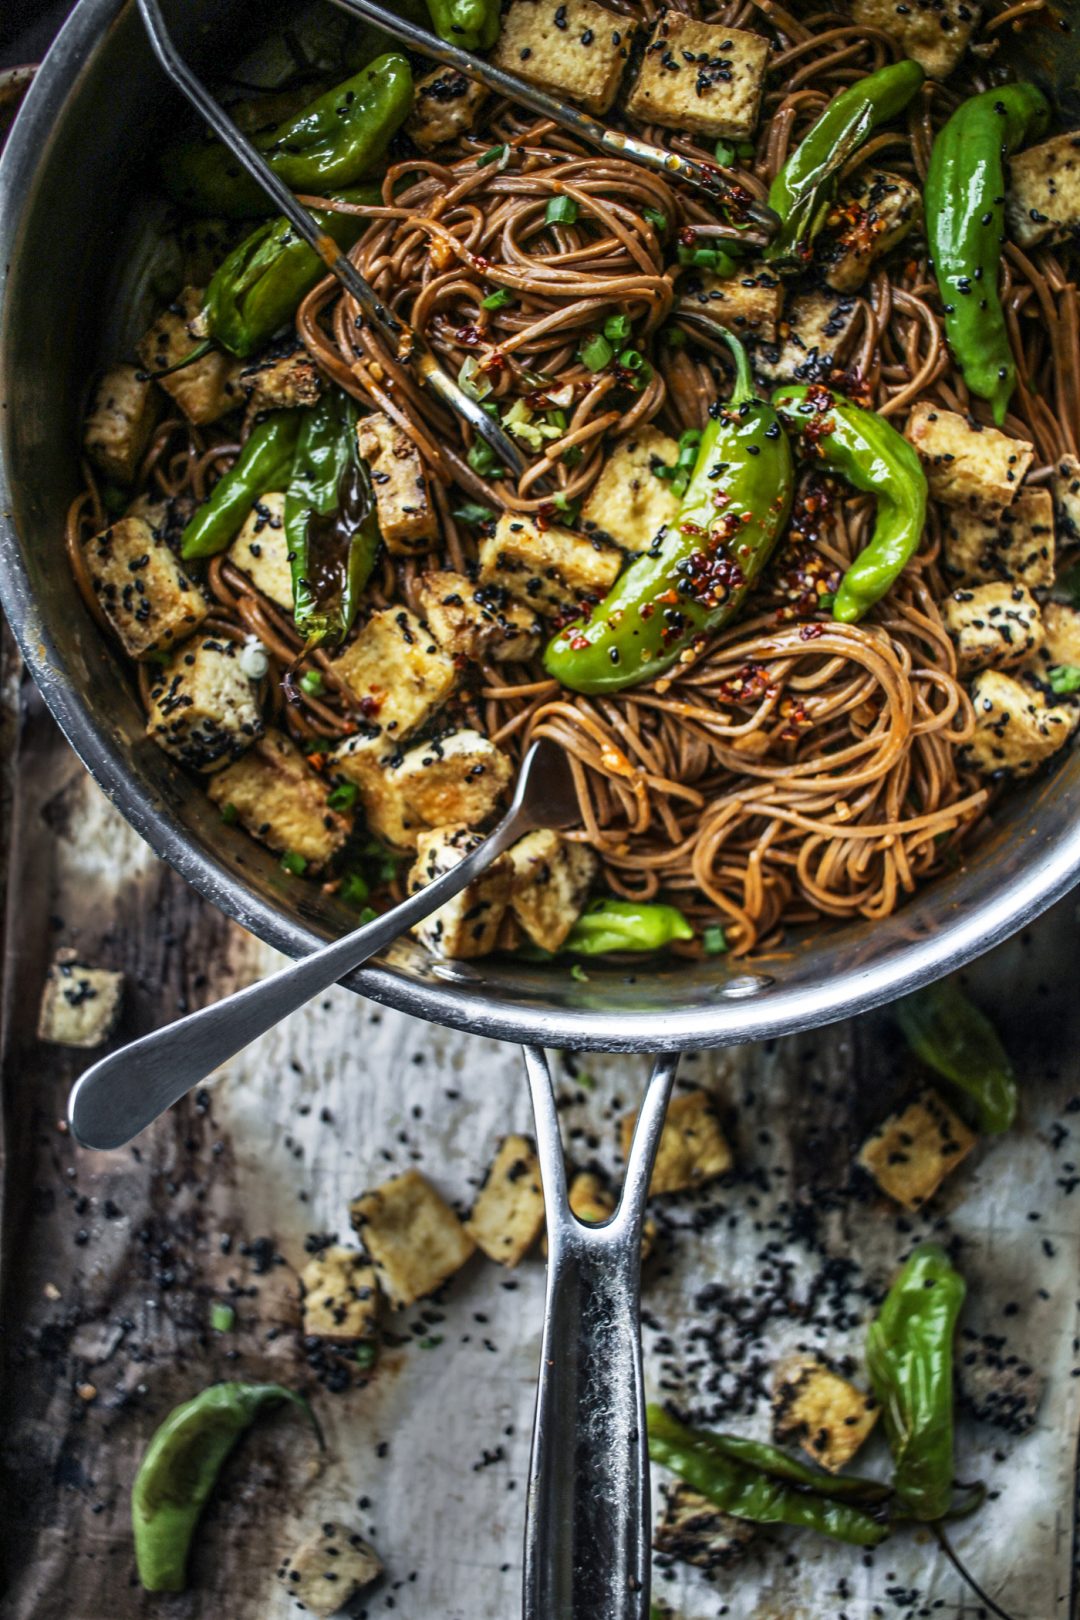 Black food bloggers you should be following -- because they're some of the best food bloggers out there, period: Chocolate for Basil - Peanut Noodles with Sesame Tofu 